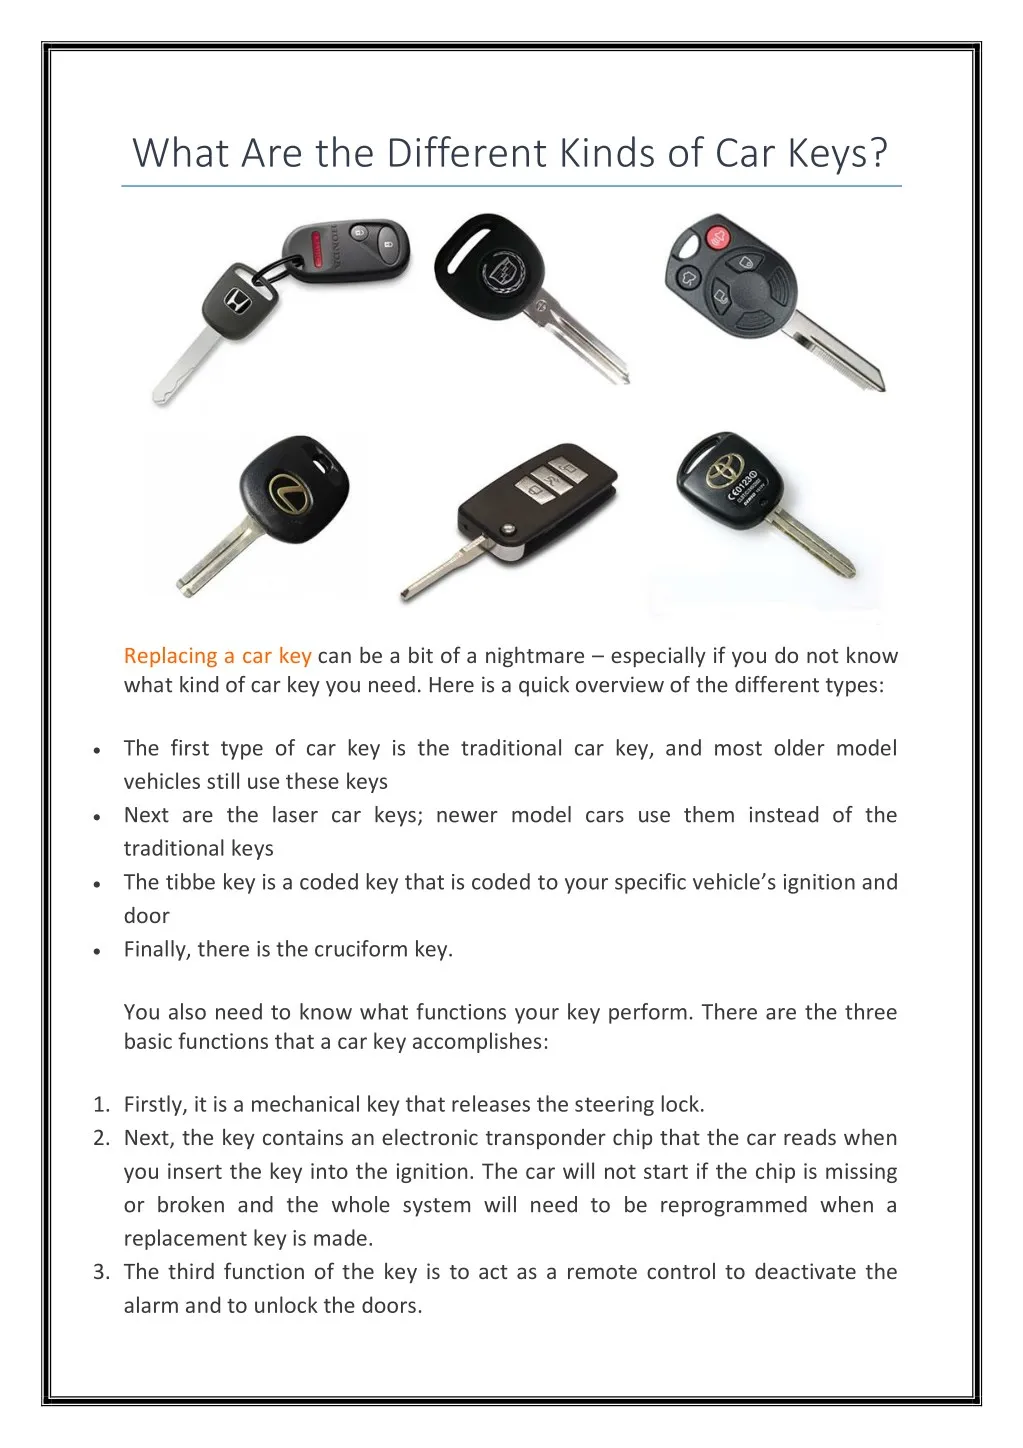 what are the different kinds of car keys